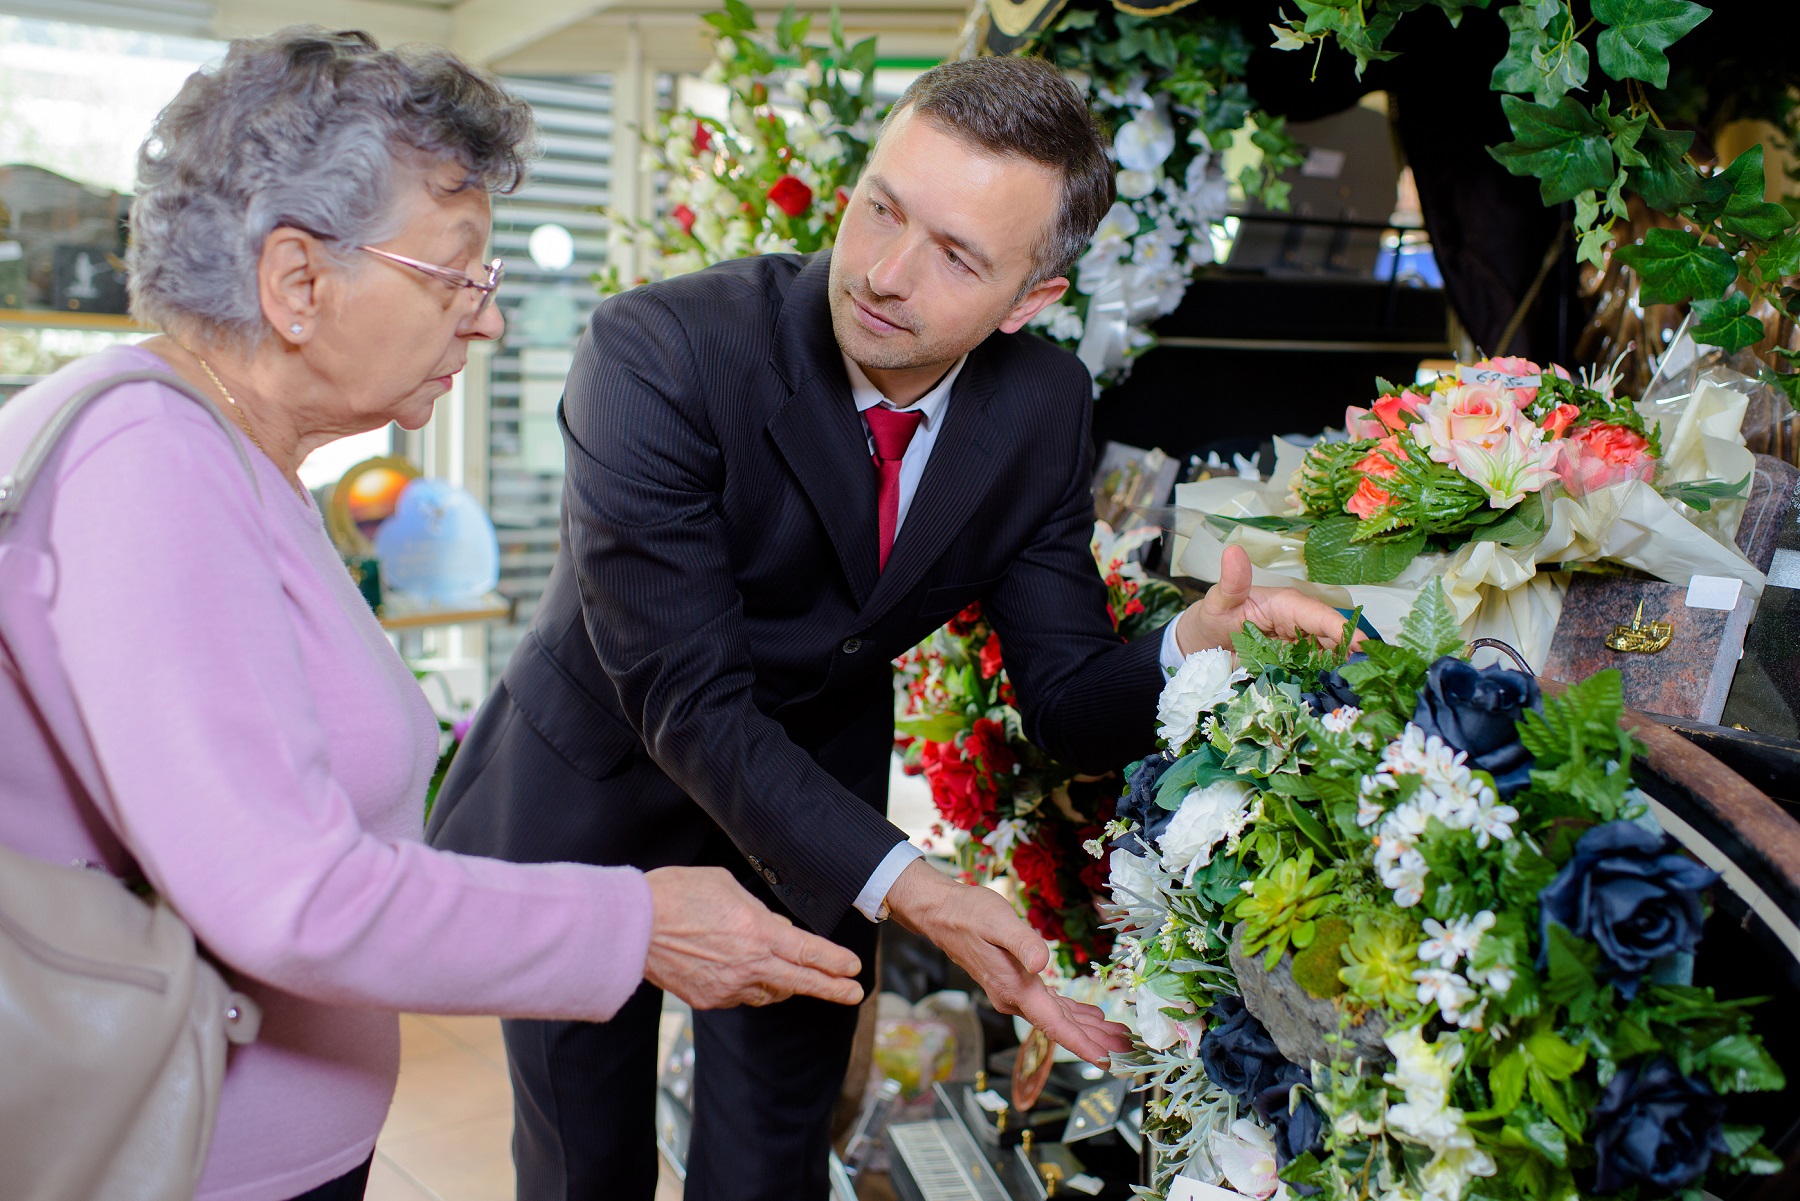 woman choosing flowers with help of funeral director